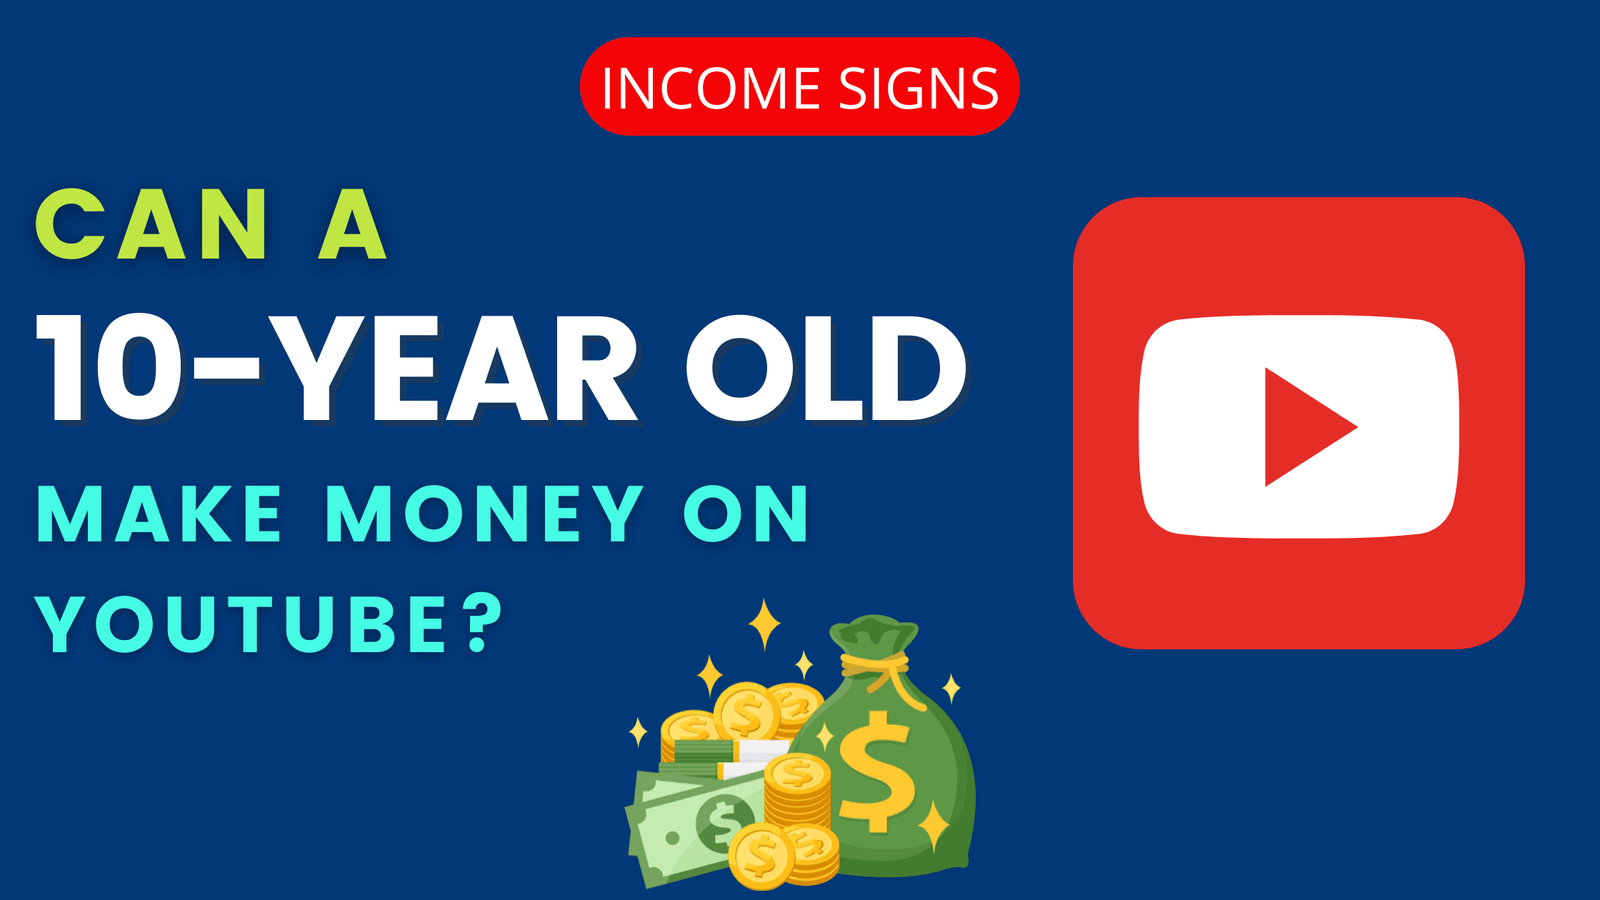 Can a 10-year old make money on YouTube?